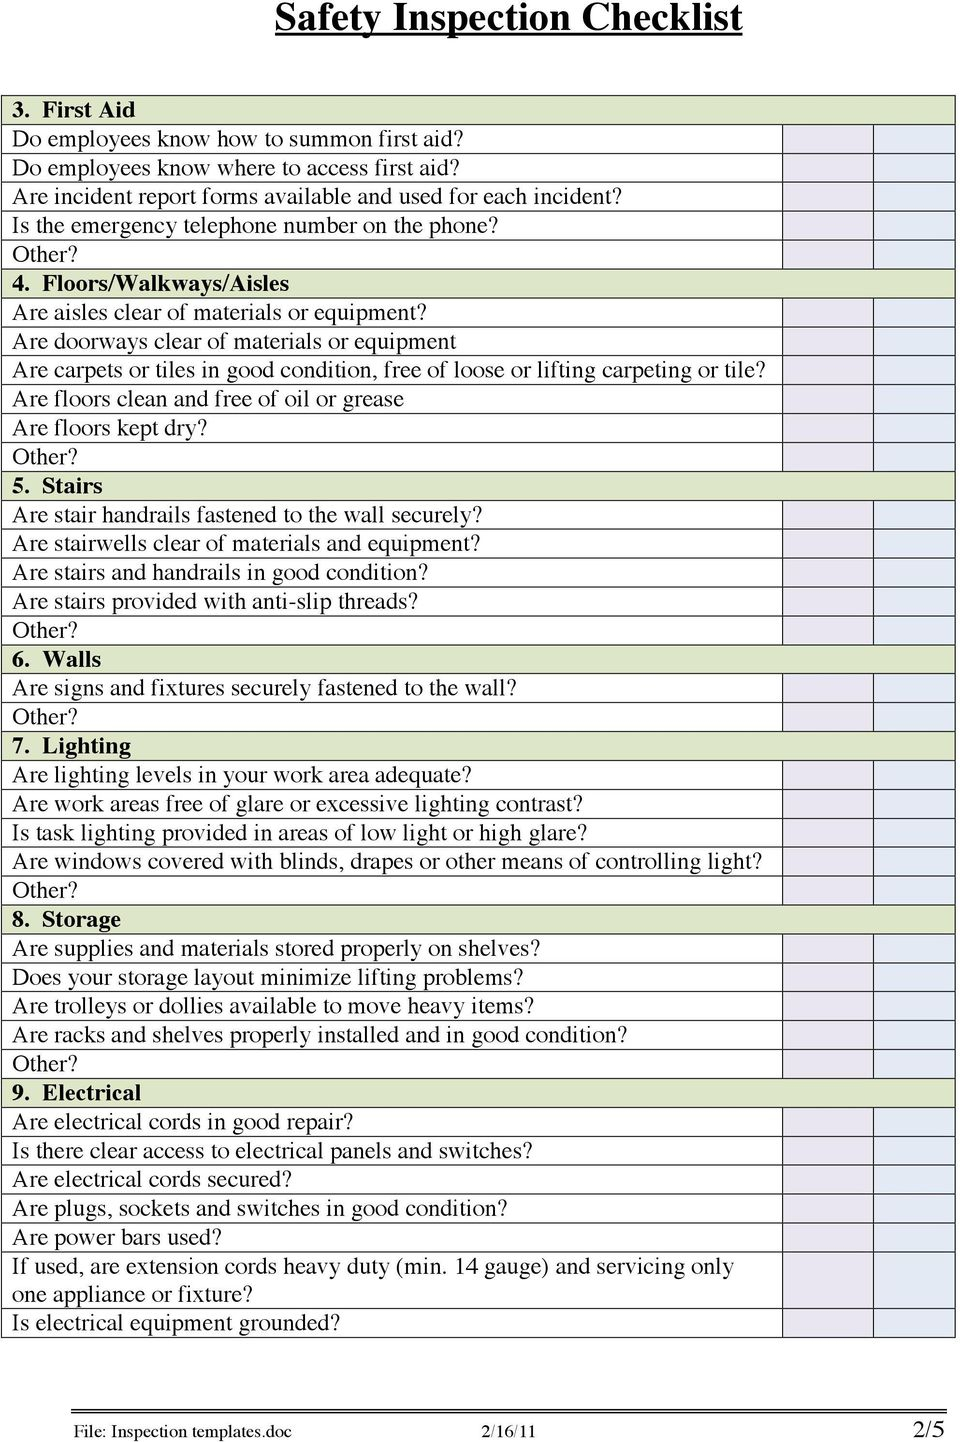 erinpurcelll: Warehouse Inspection Checklist Template : Ultimate  With Regard To Warehouse Safety Inspection Checklist Template Inside Warehouse Safety Inspection Checklist Template